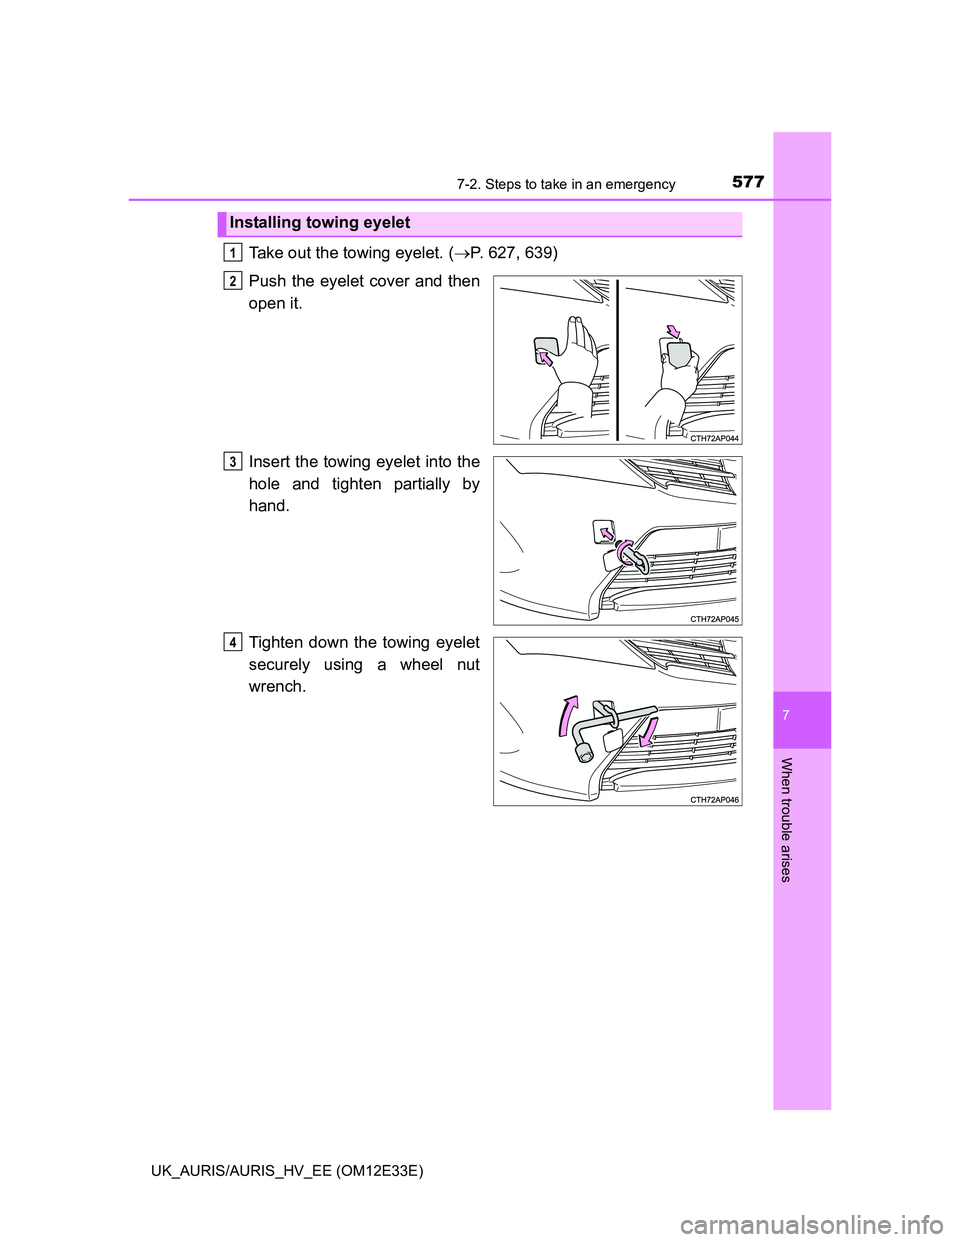 TOYOTA AURIS 2012  Owners Manual (in English) 5777-2. Steps to take in an emergency
UK_AURIS/AURIS_HV_EE (OM12E33E)
7
When trouble arises
Take out the towing eyelet. (P. 627, 639)
Push the eyelet cover and then
open it.
Insert the towing eyele